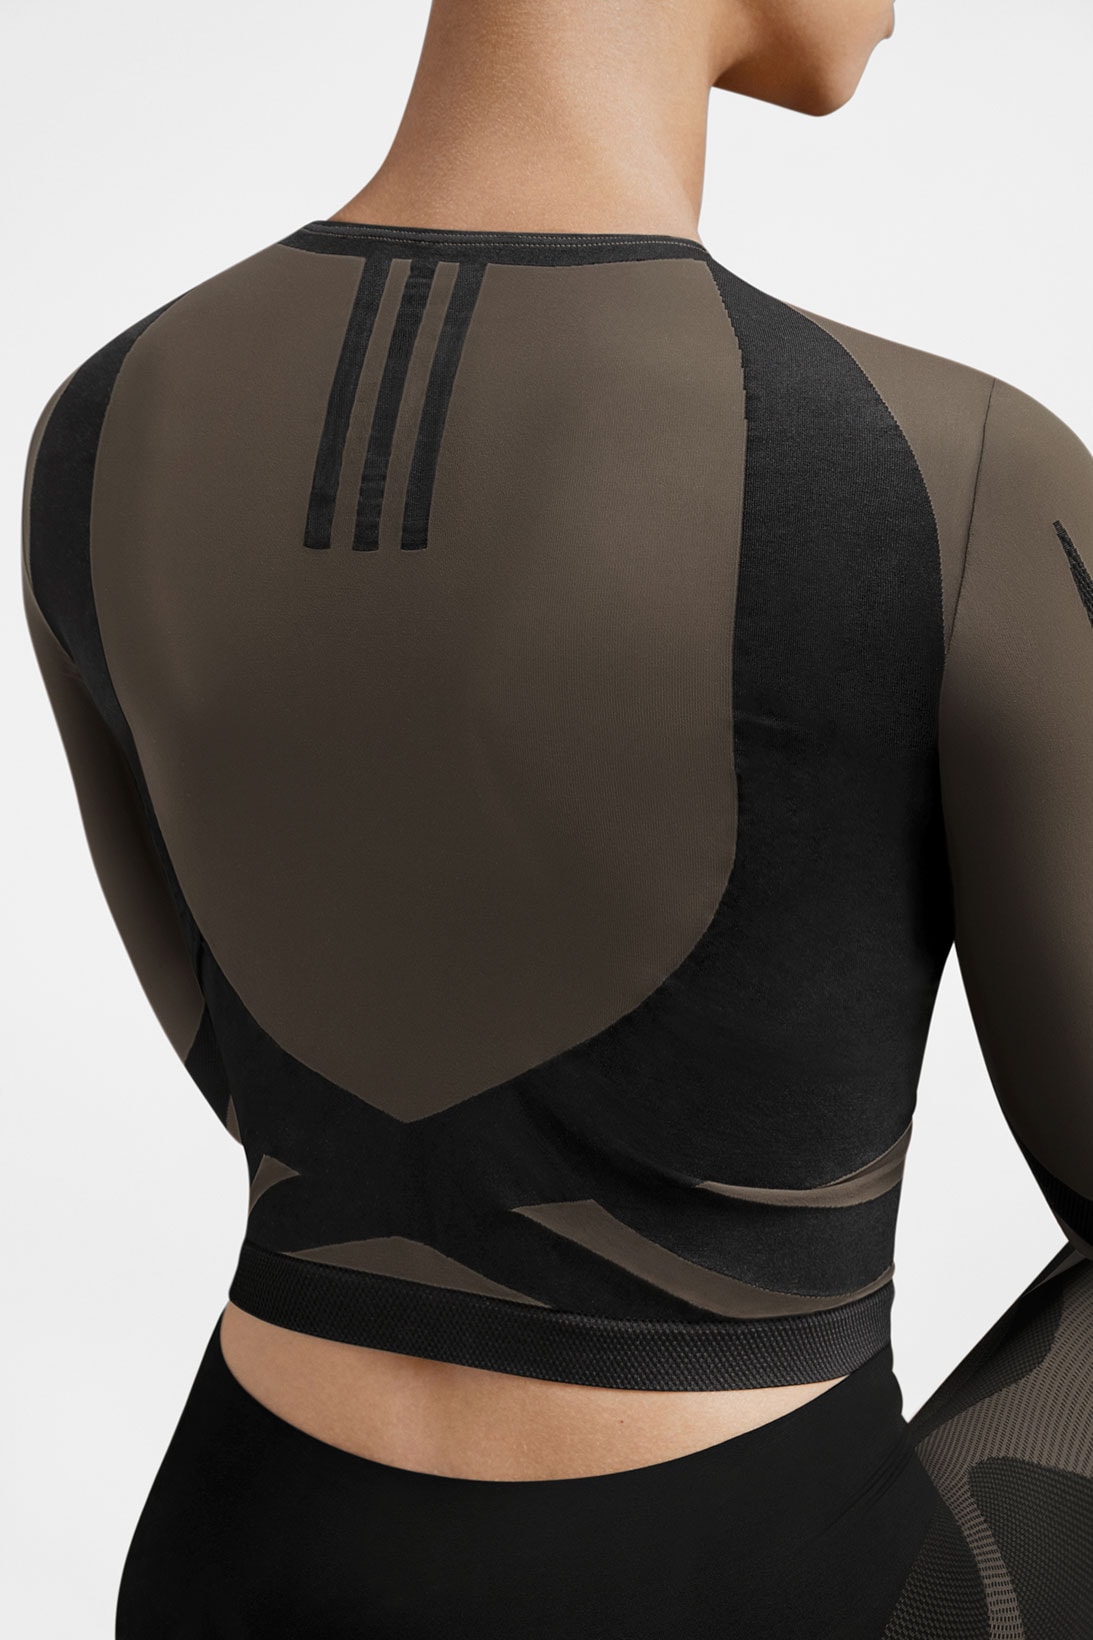 Wolford x Adidas Sheer Motion Bodysuit in Black & Nearly Black